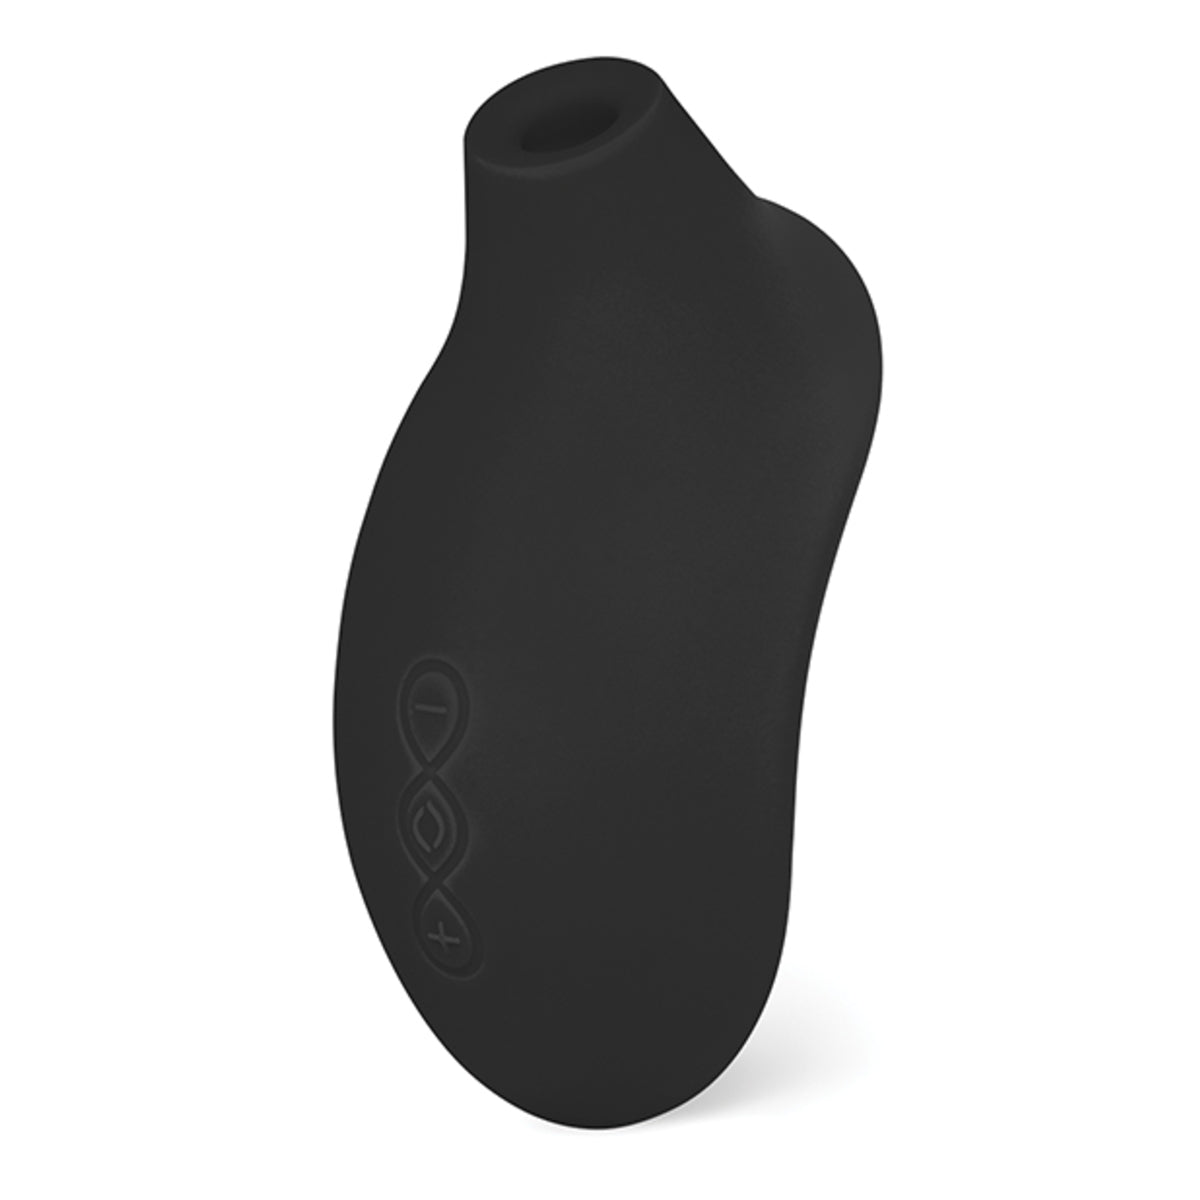 The Sona 2 is a pleasure air technology toy that pulses on the clitoris for an unbelievable and modern way to orgasm. Ergonomic and fits right in the palm of your hand! The sona is a quiet toy, which makes this toy a real 3 in 1!